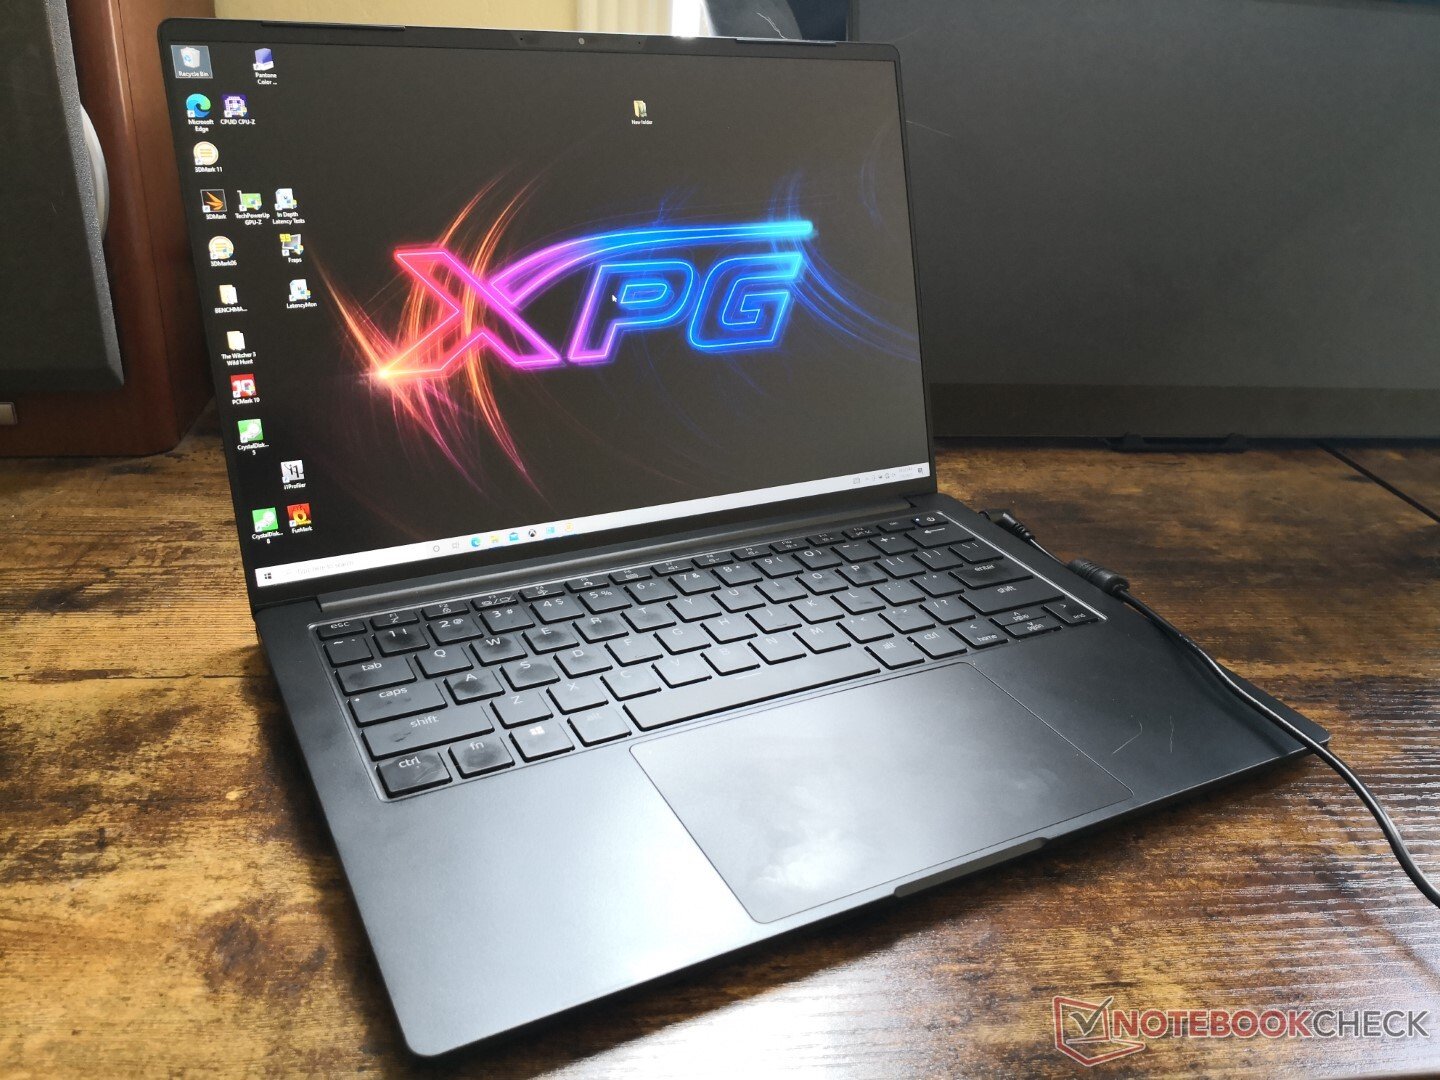 Wonderful XPG Xenia 14 ultralight laptop laptop is a low cost after a sizeable 44% cut merit tag on B&H Listing